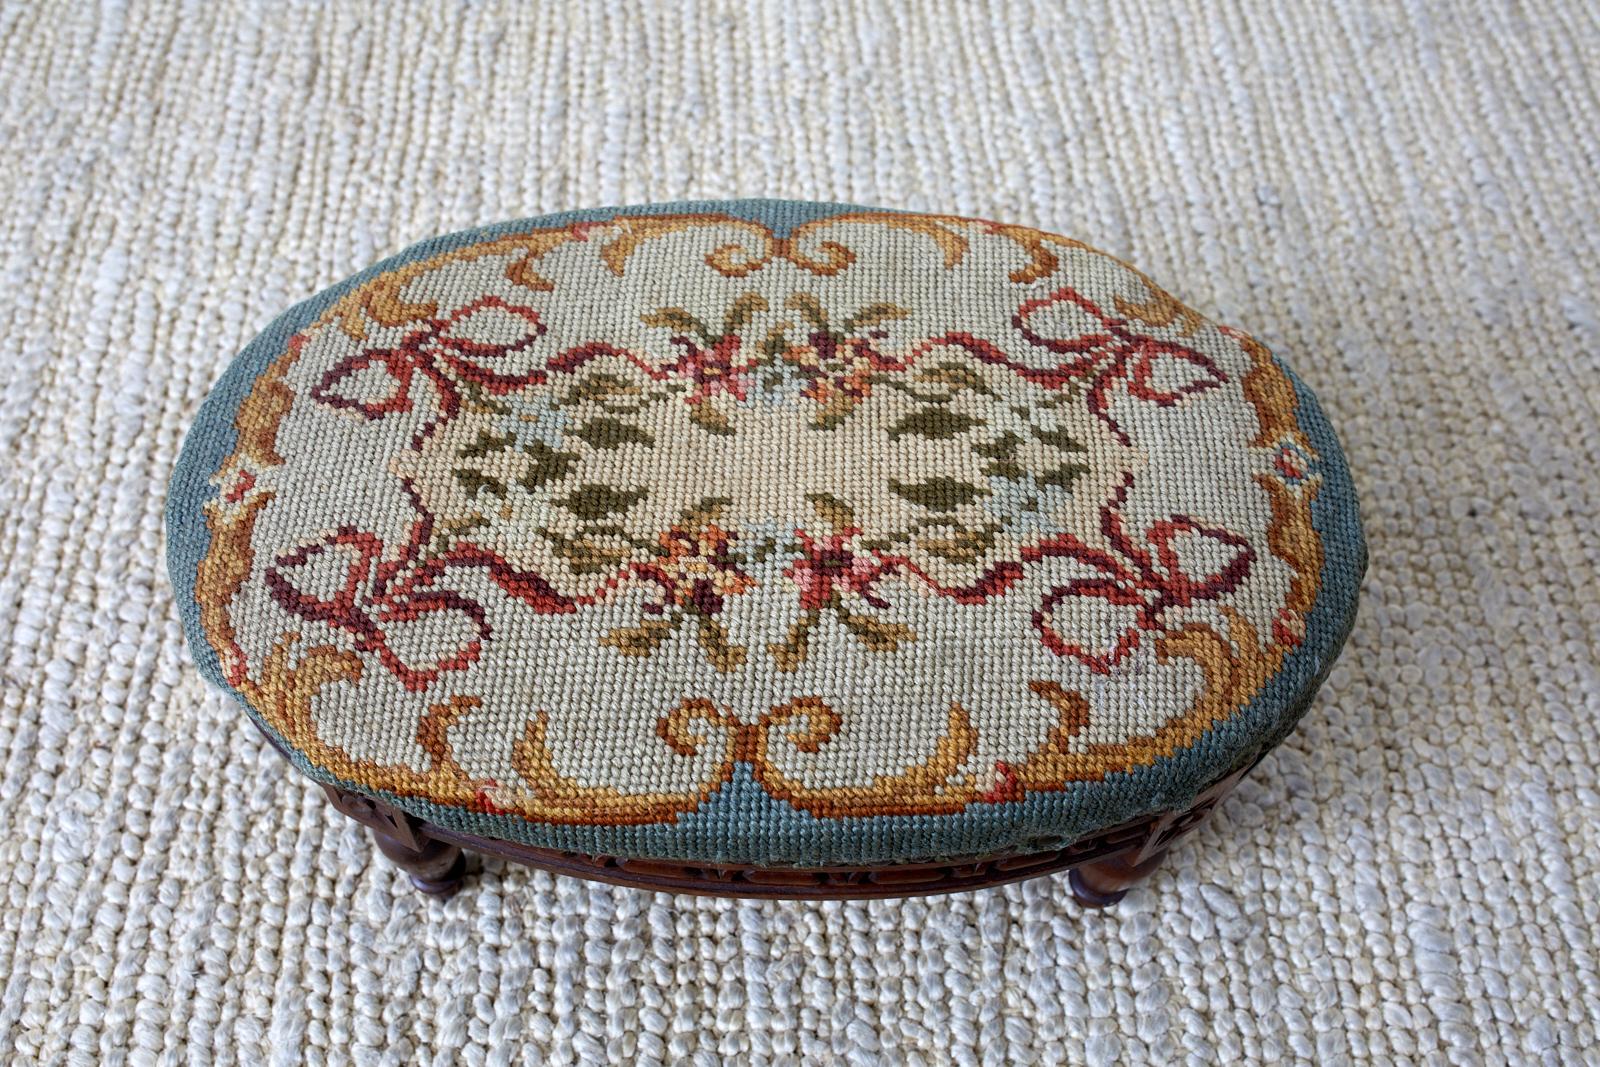 19th century carved walnut oval footstool made in the Louis XVI taste. Featuring a needlepoint upholstery and brass nailhead trim. Intricately carved apron with turned legs.
 